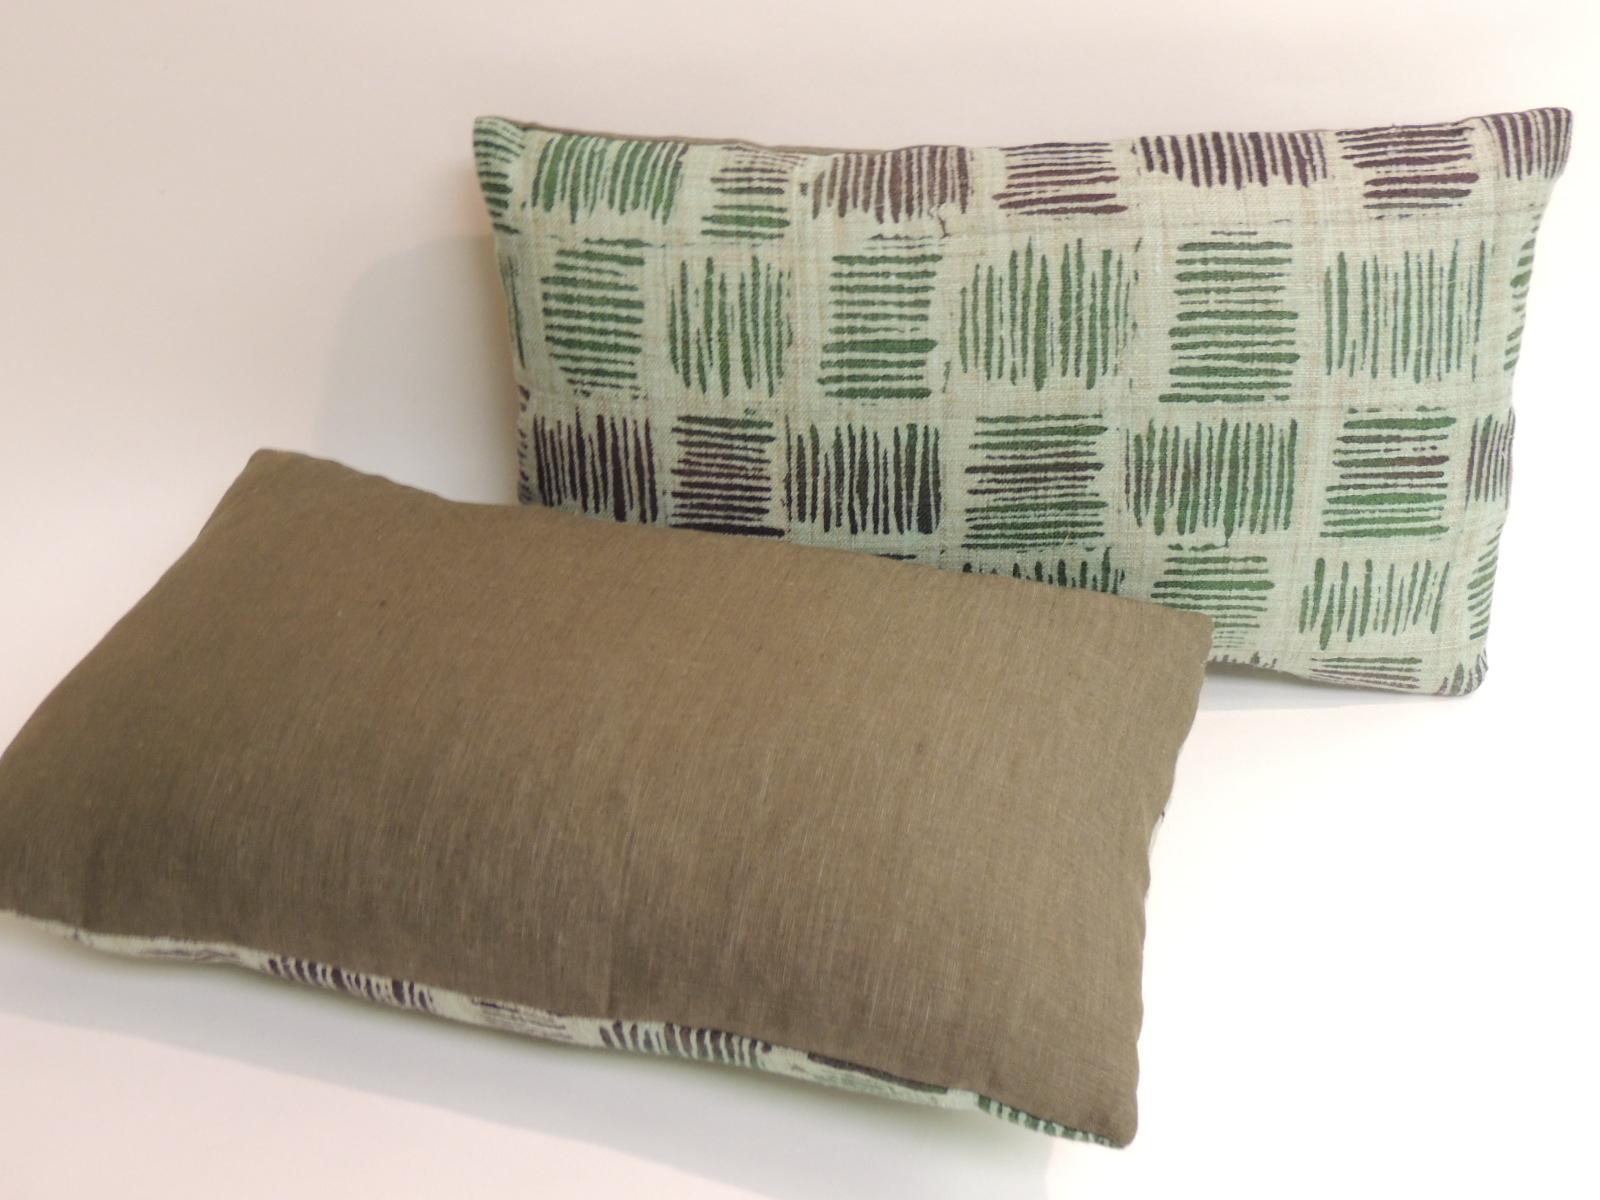 Vintage hand blocked green and brown decorative lumbar pillows with green linen backing.
Decorative pillow handcrafted and designed in the USA. 
Closure by stitch (no zipper closure) with custom made pillow insert.
Size: 12 x 20 x 6.